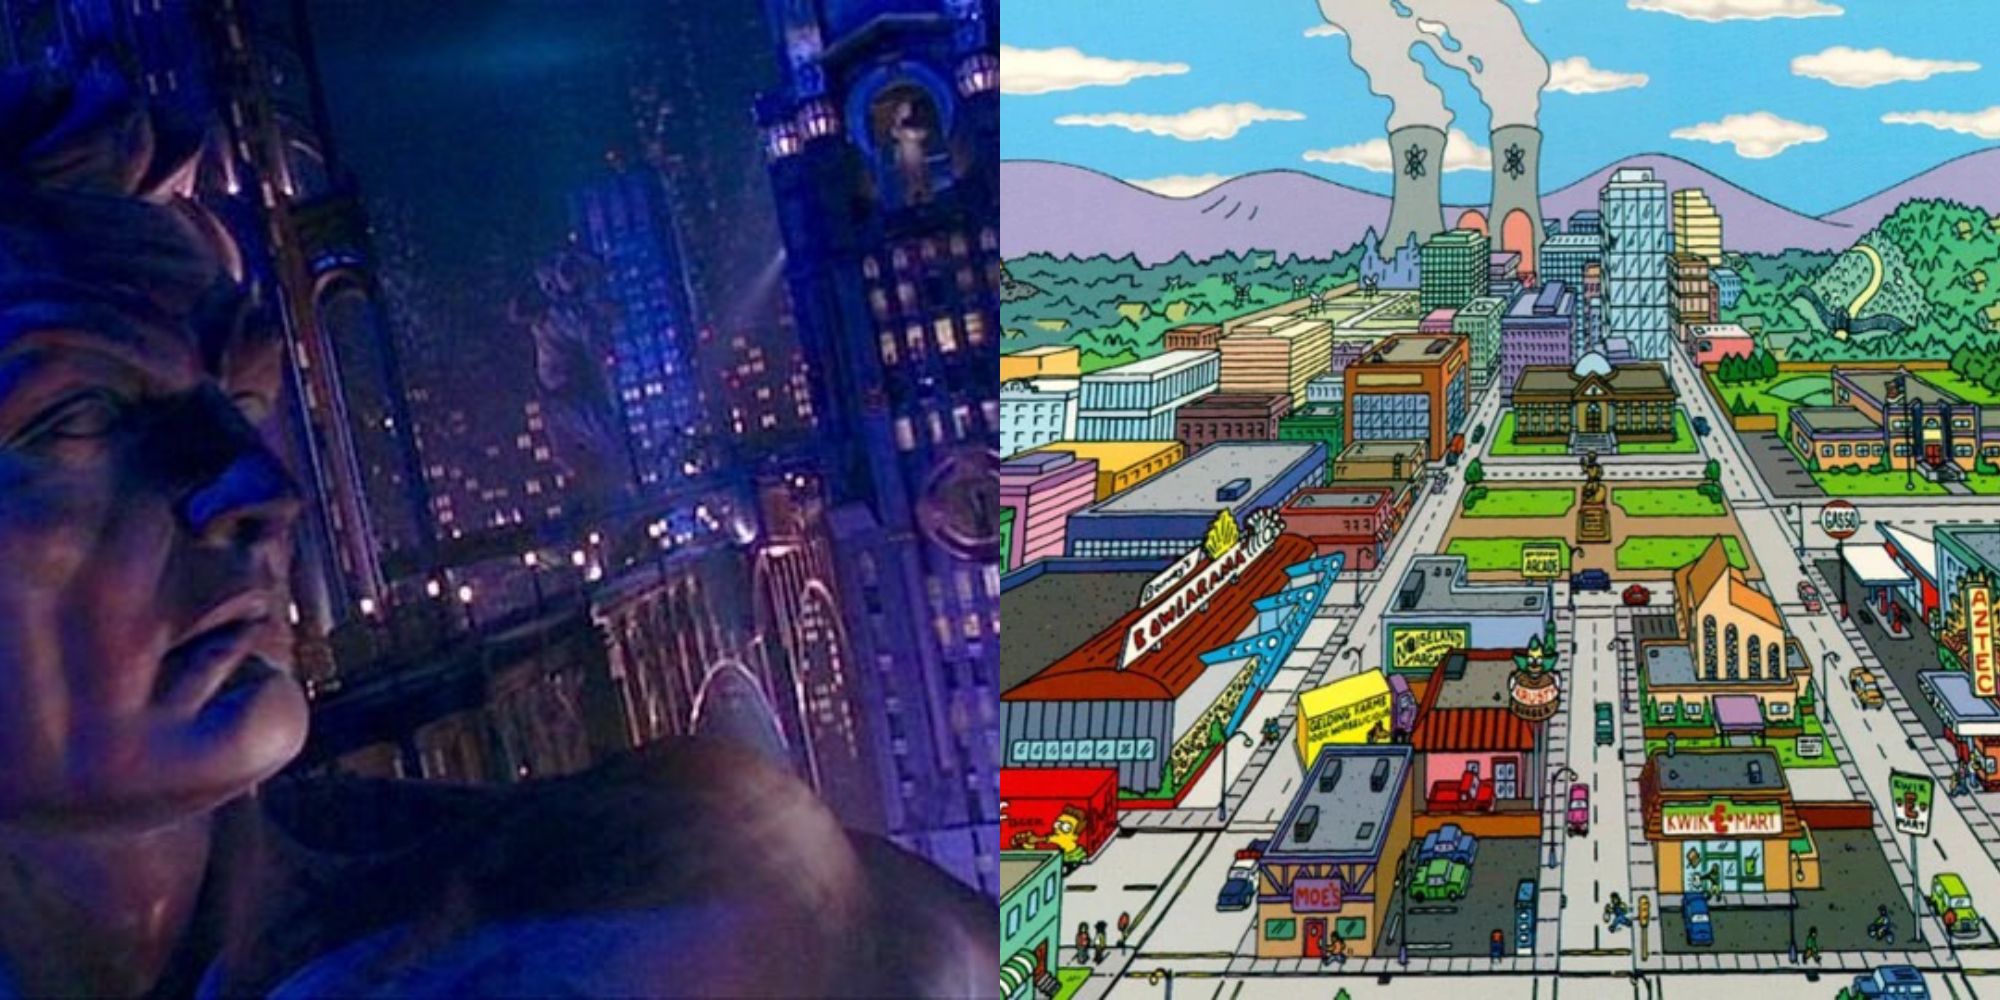 Split image showing Gotham City in Batman & Robin and Springfield in The Simpsons.